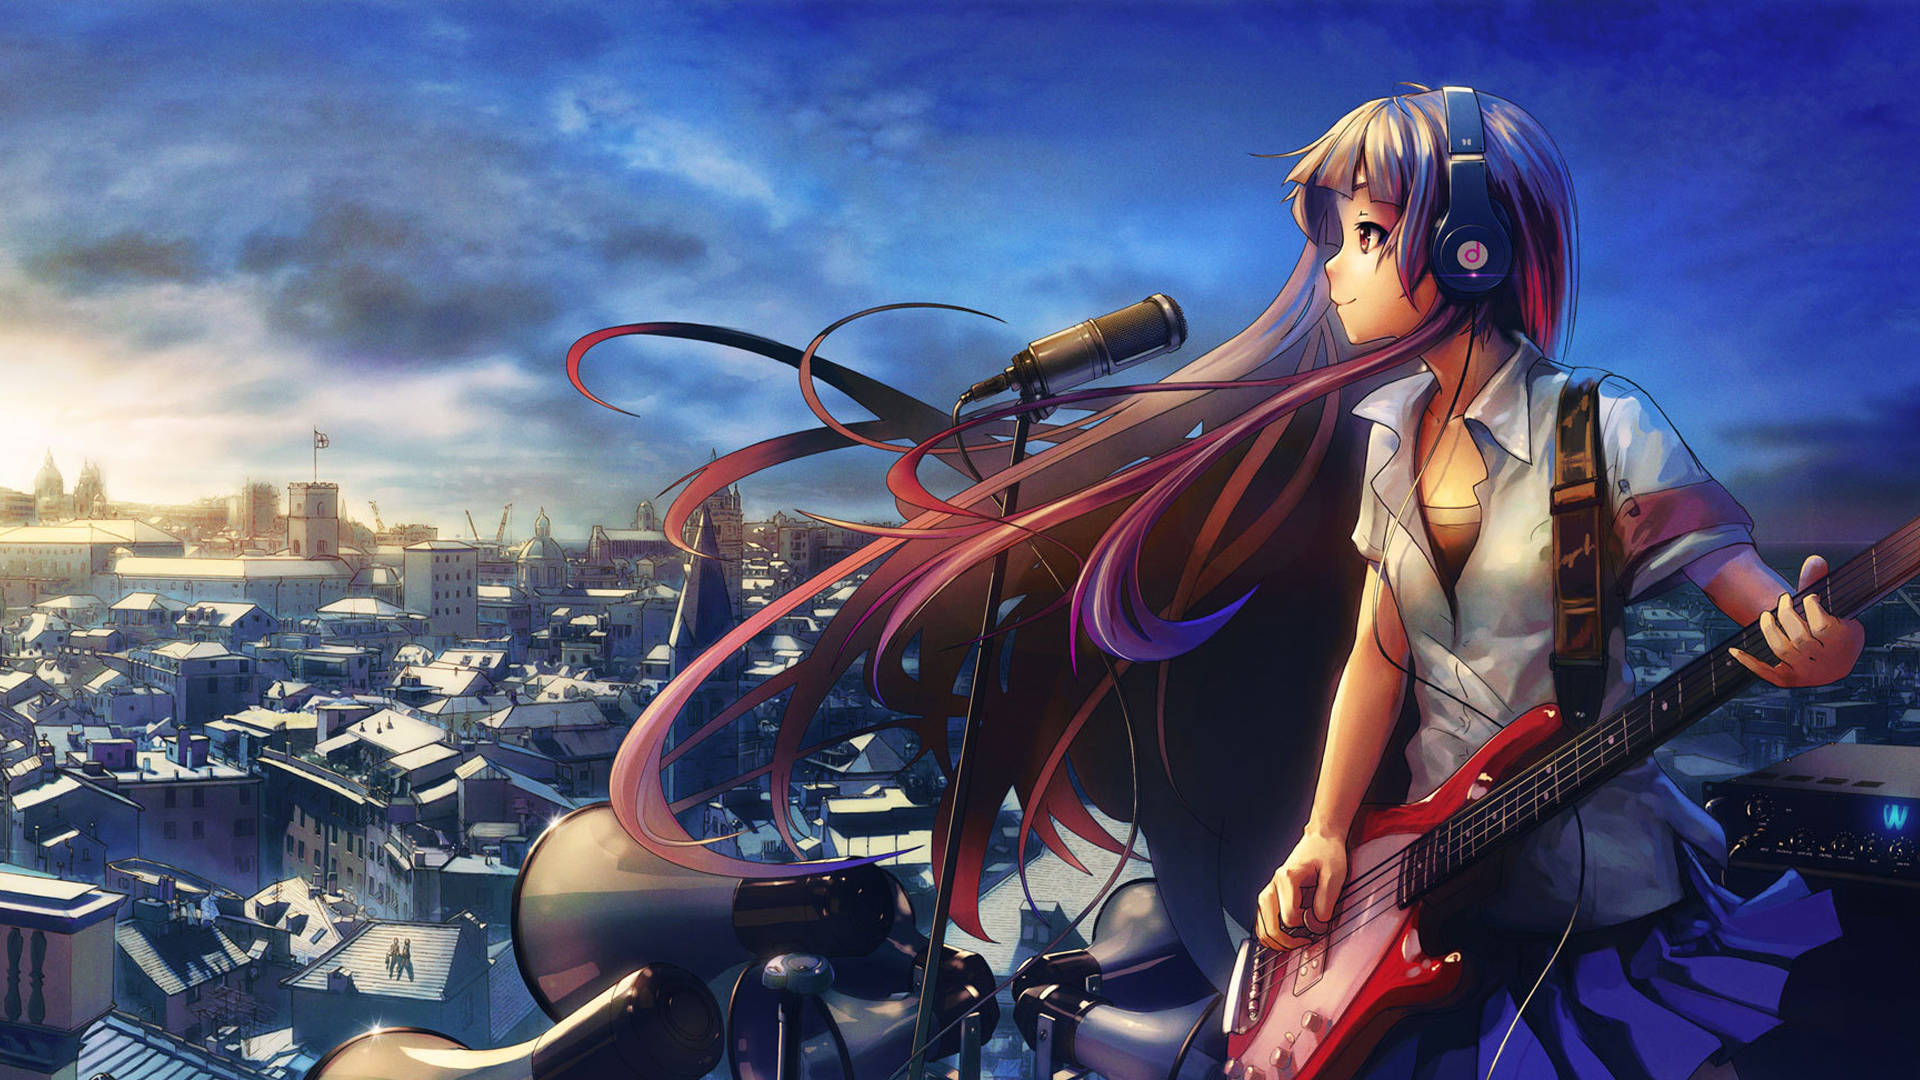 1920x1080 Full Hd Anime Girl Playing Guitar On Rooftop